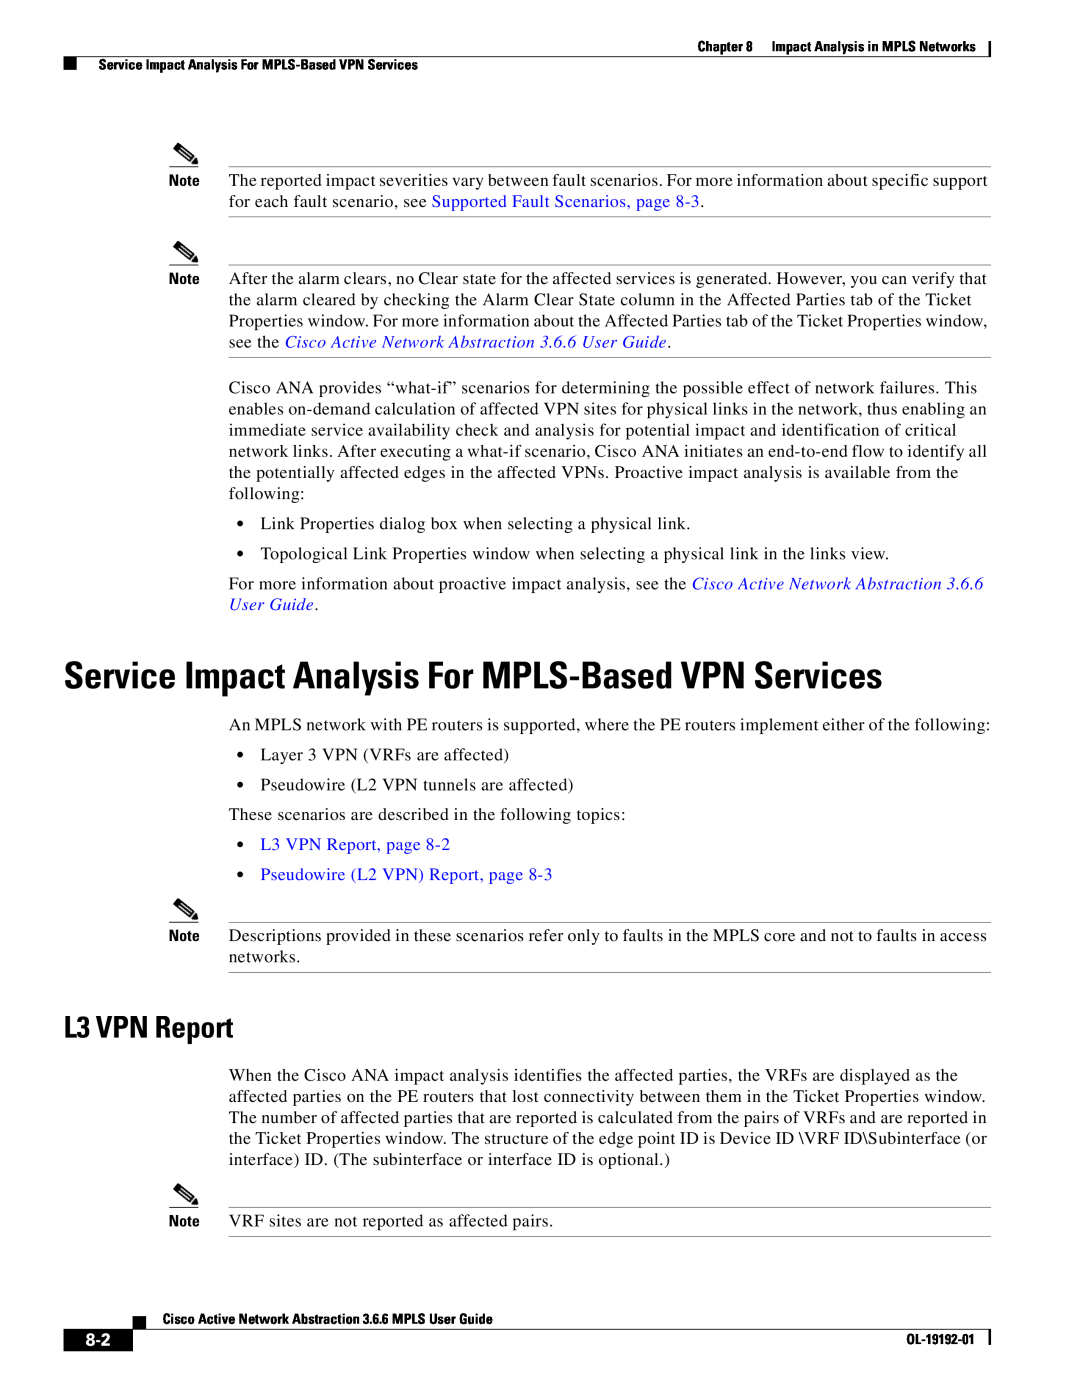 Cisco Systems 3.6.6 manual Service Impact Analysis For MPLS-Based VPN Services, L3 VPN Report 